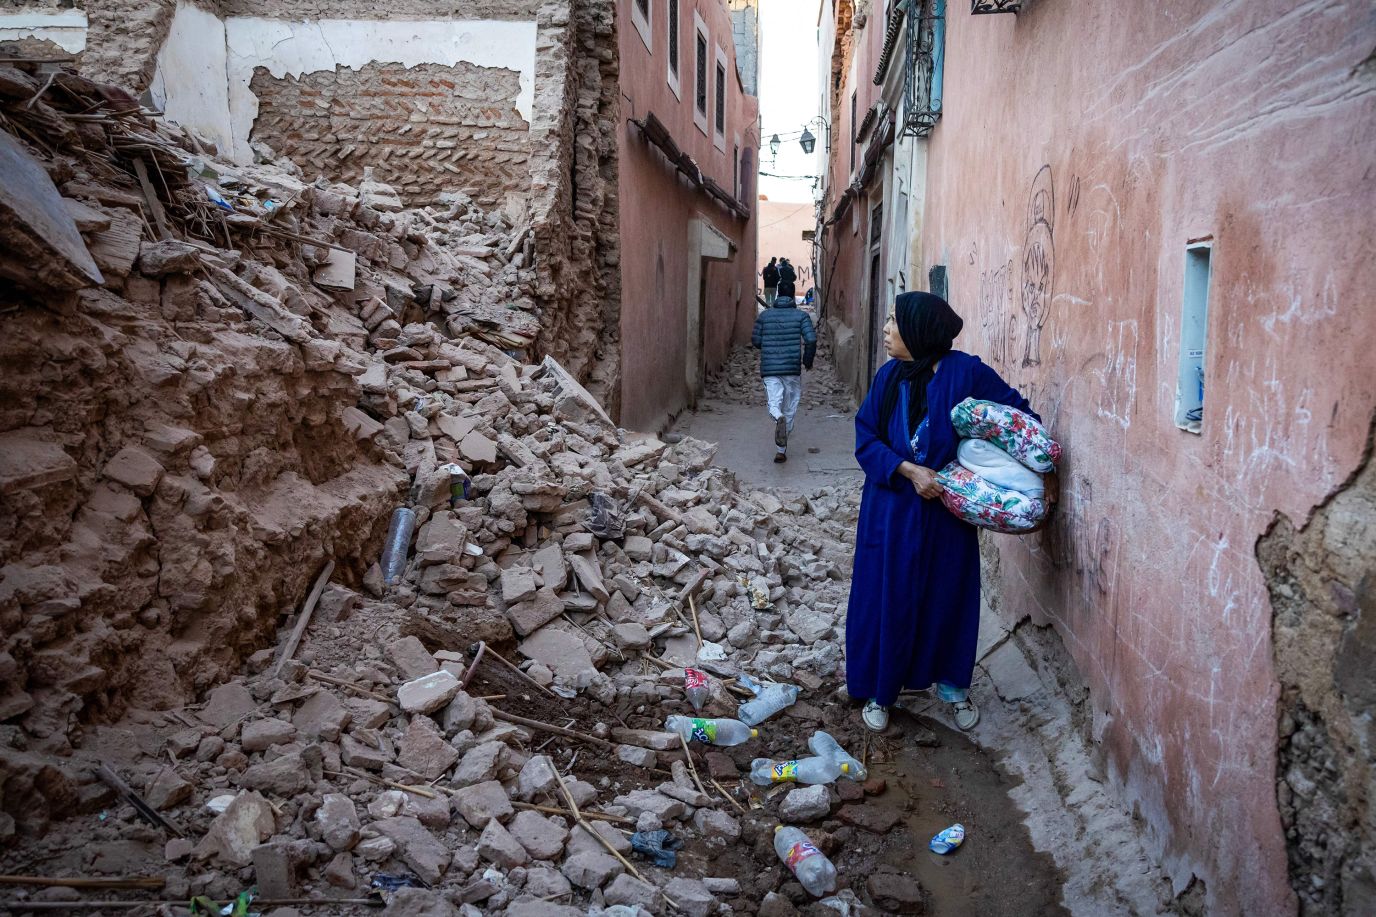 A woman looks at the rubble of a building in Marrakech, Morocco on September 9. 